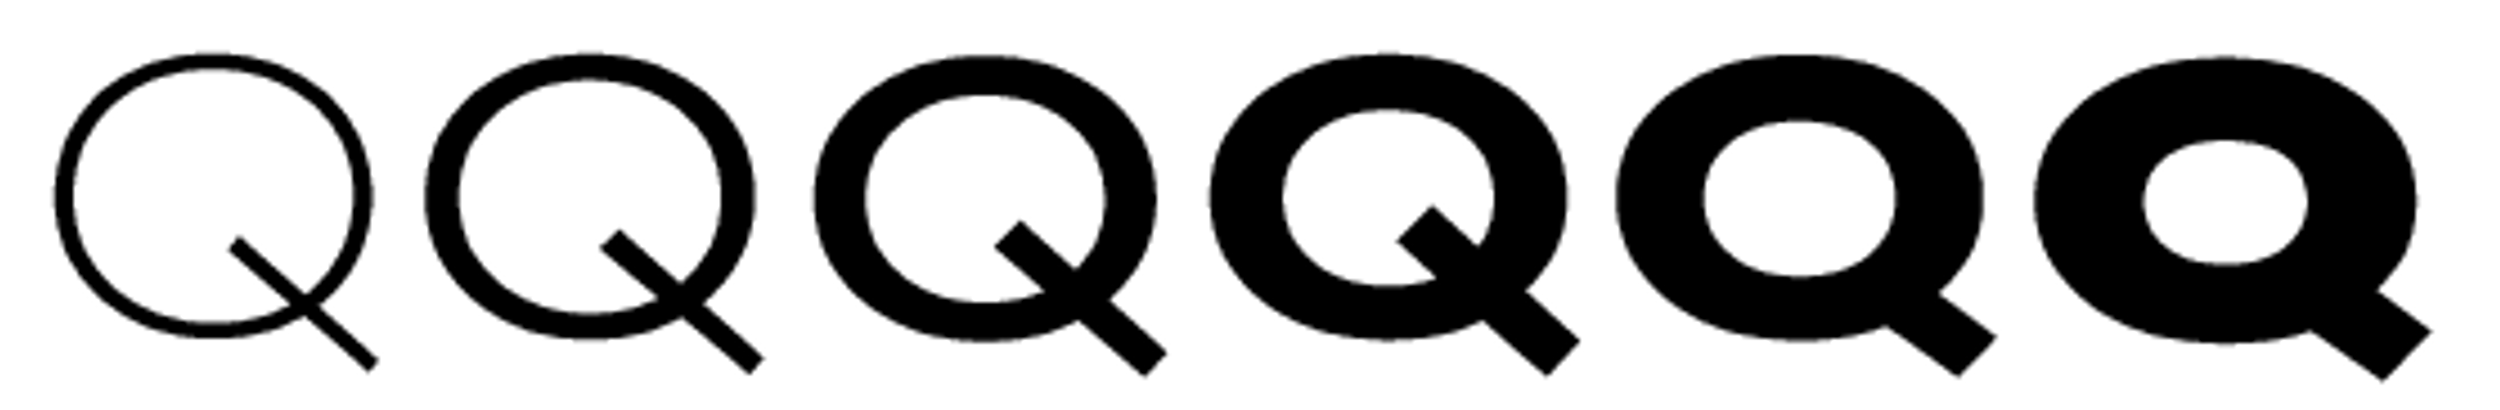 Glyphs for weight variations of capital Q with simplified strokes at heavier weights